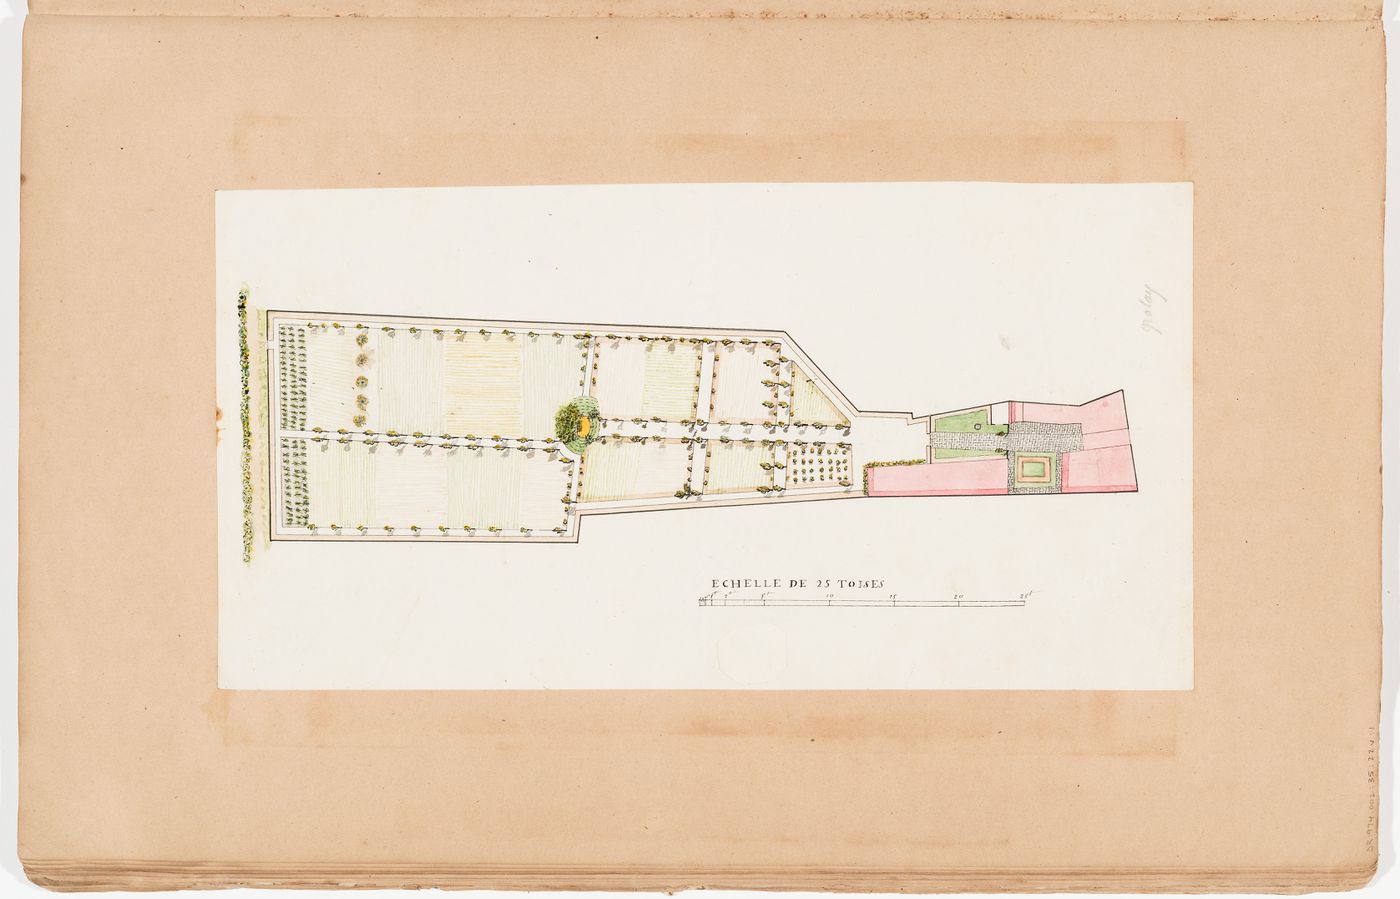 Elevation, site plan showing the ground floor, and plans for the "caves" and first floor for a country house and garden; verso: Plan of a country house garden